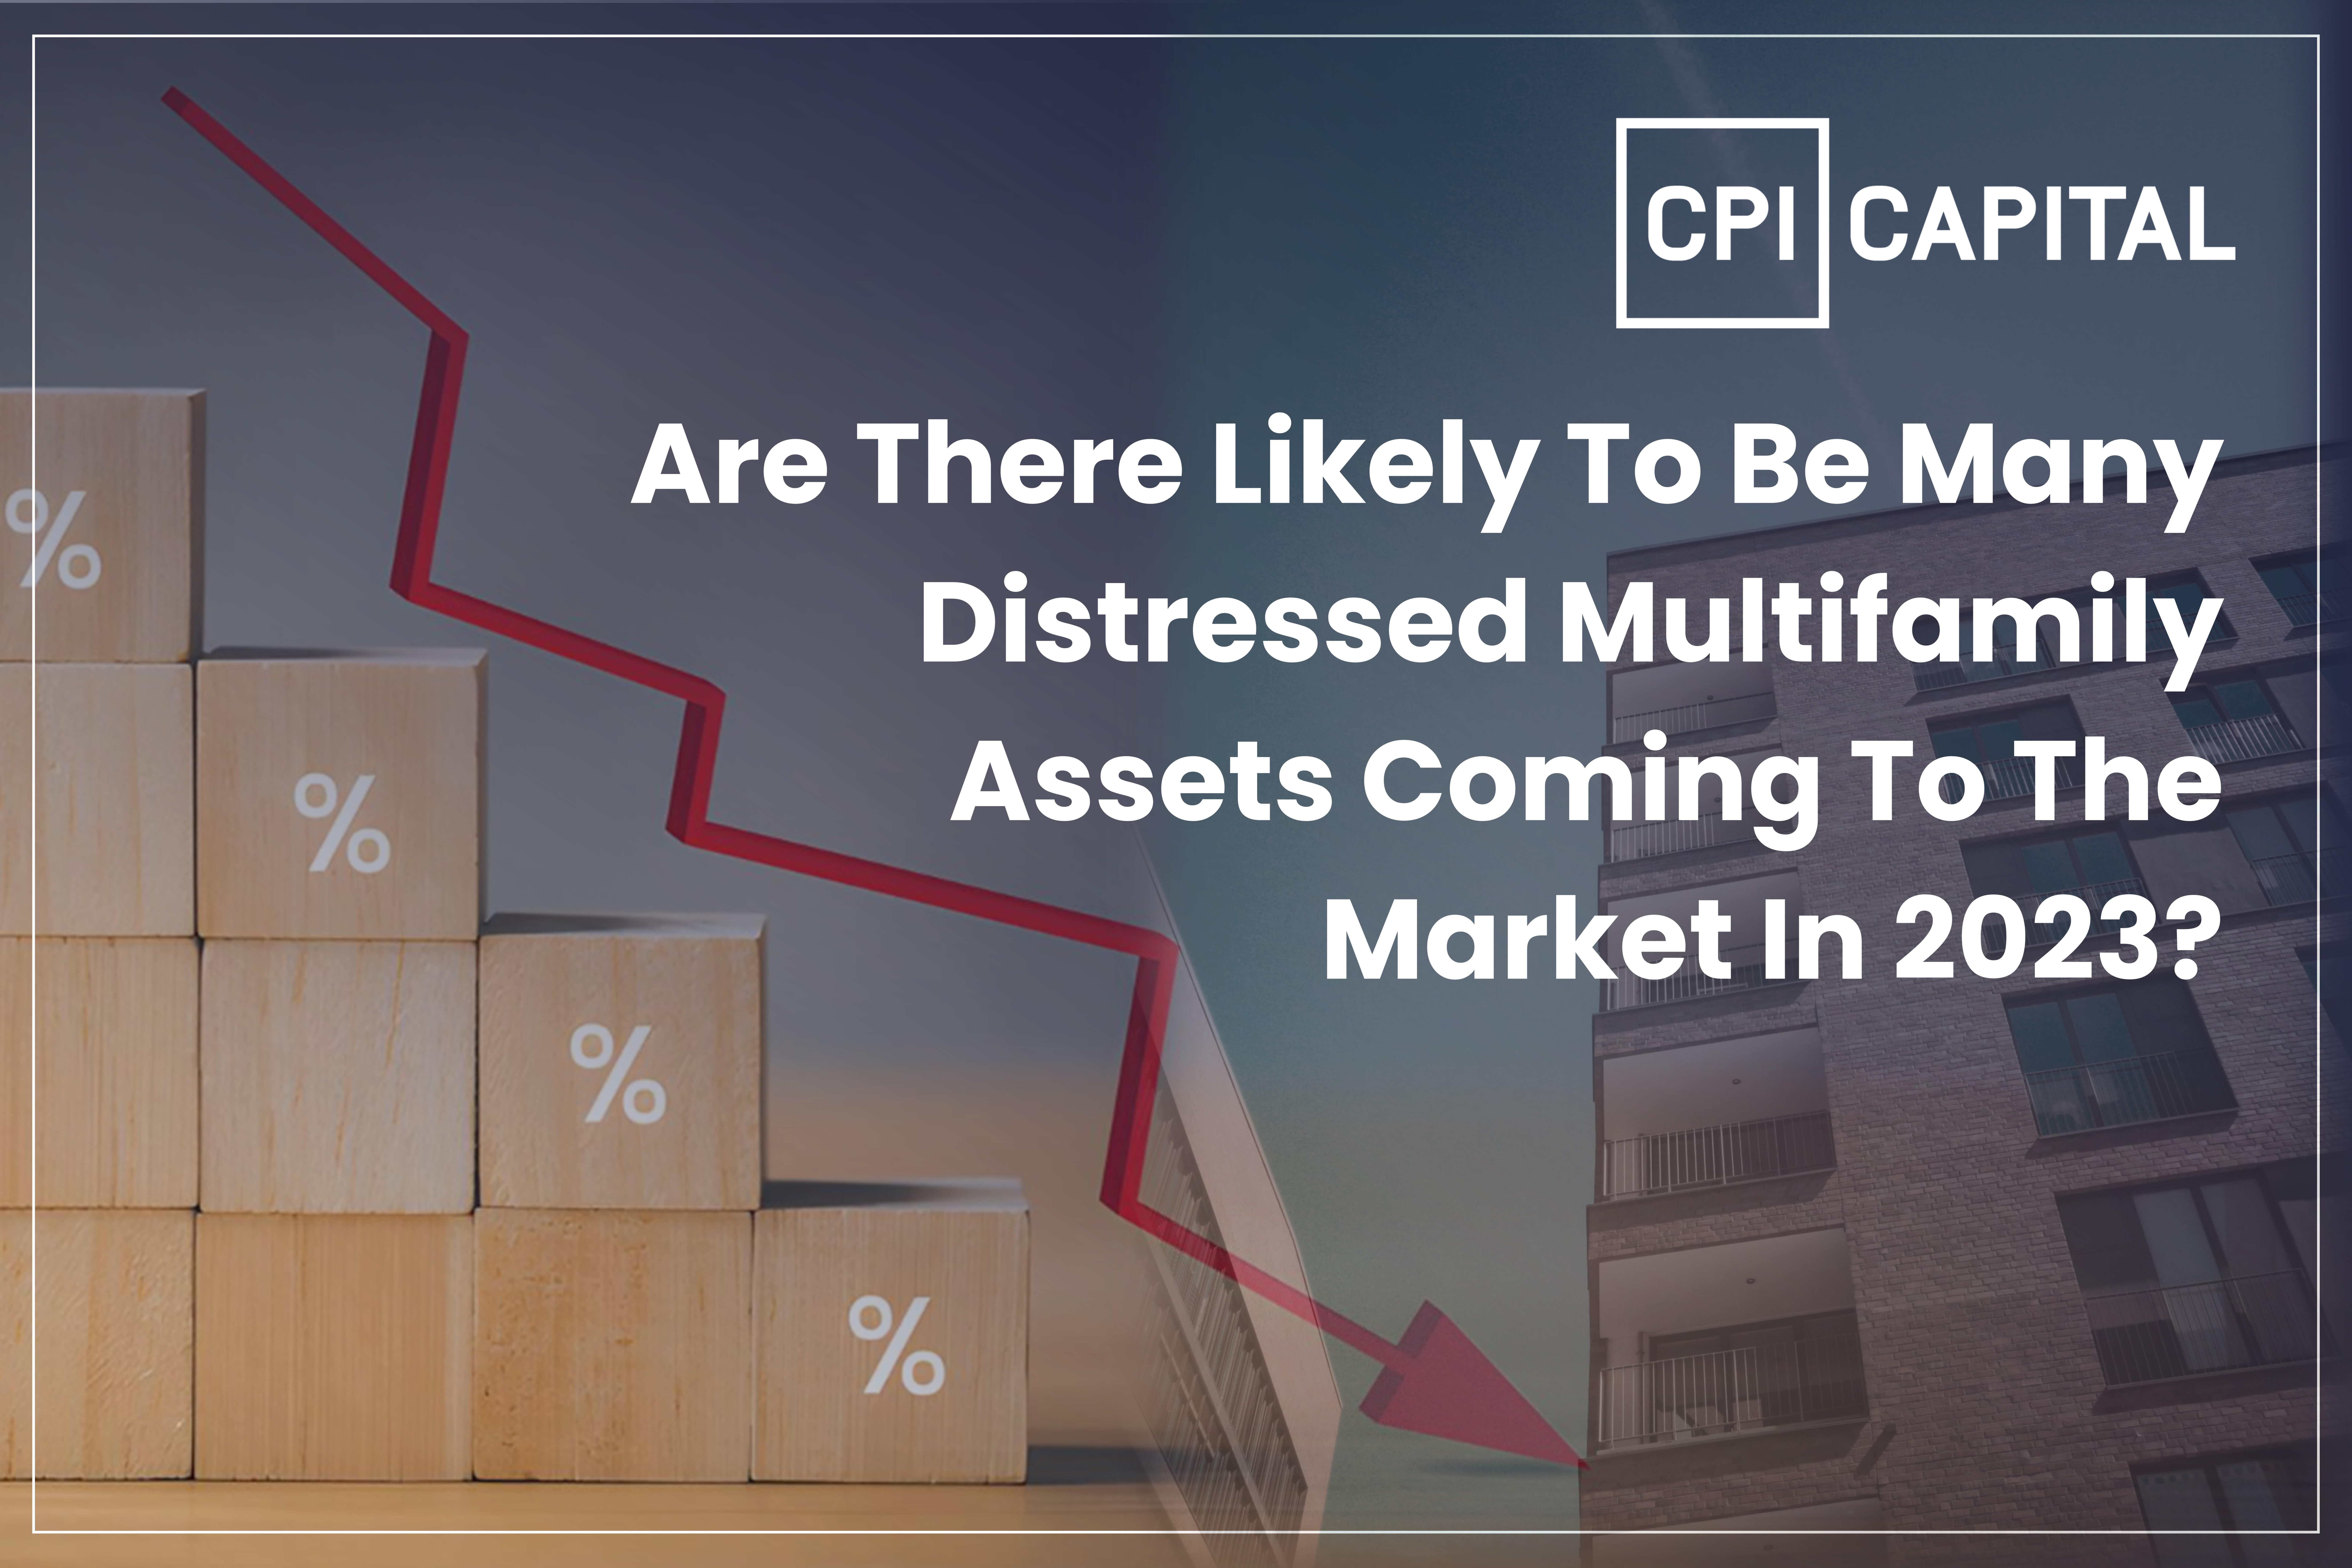 CPI capital_Are There Likely To Be Many Distressed Multifamily Assets Coming To The Market In 2023